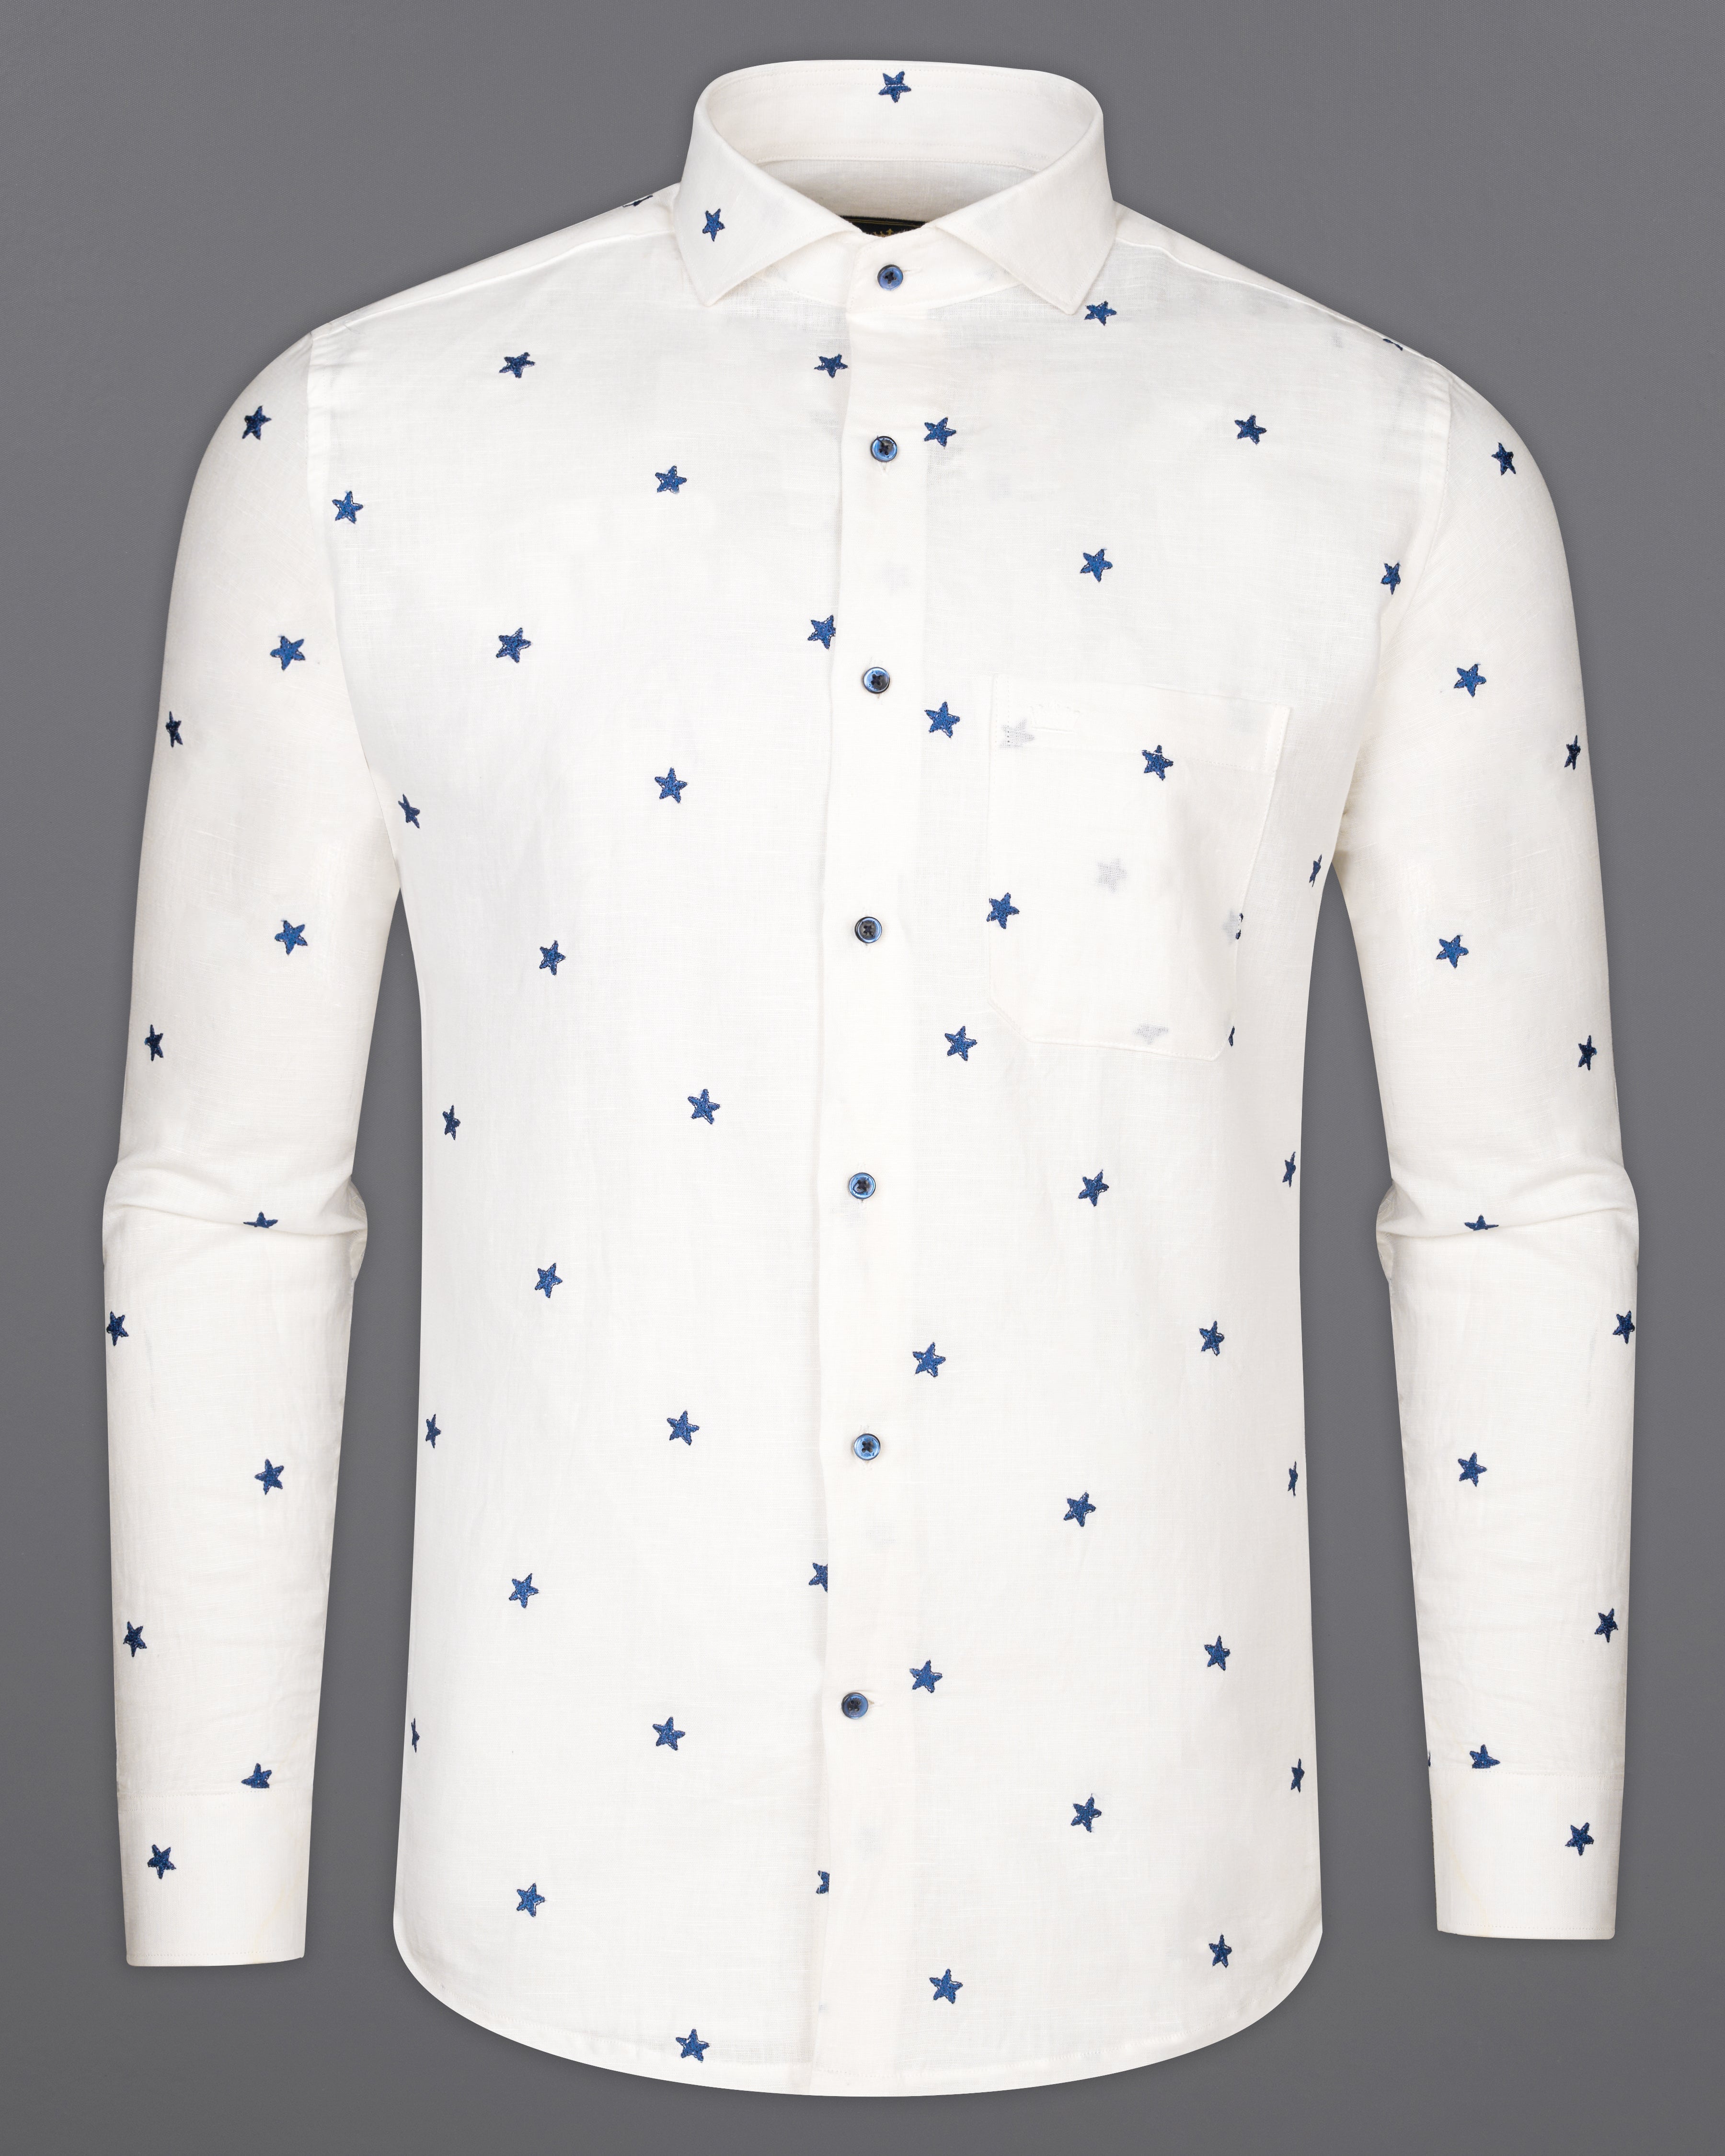 Off White with Stars Textured Luxurious Linen Shirt 9760-CA-BLE-38, 9760-CA-BLE-H-38, 9760-CA-BLE-39, 9760-CA-BLE-H-39, 9760-CA-BLE-40, 9760-CA-BLE-H-40, 9760-CA-BLE-42, 9760-CA-BLE-H-42, 9760-CA-BLE-44, 9760-CA-BLE-H-44, 9760-CA-BLE-46, 9760-CA-BLE-H-46, 9760-CA-BLE-48, 9760-CA-BLE-H-48, 9760-CA-BLE-50, 9760-CA-BLE-H-50, 9760-CA-BLE-52, 9760-CA-BLE-H-52